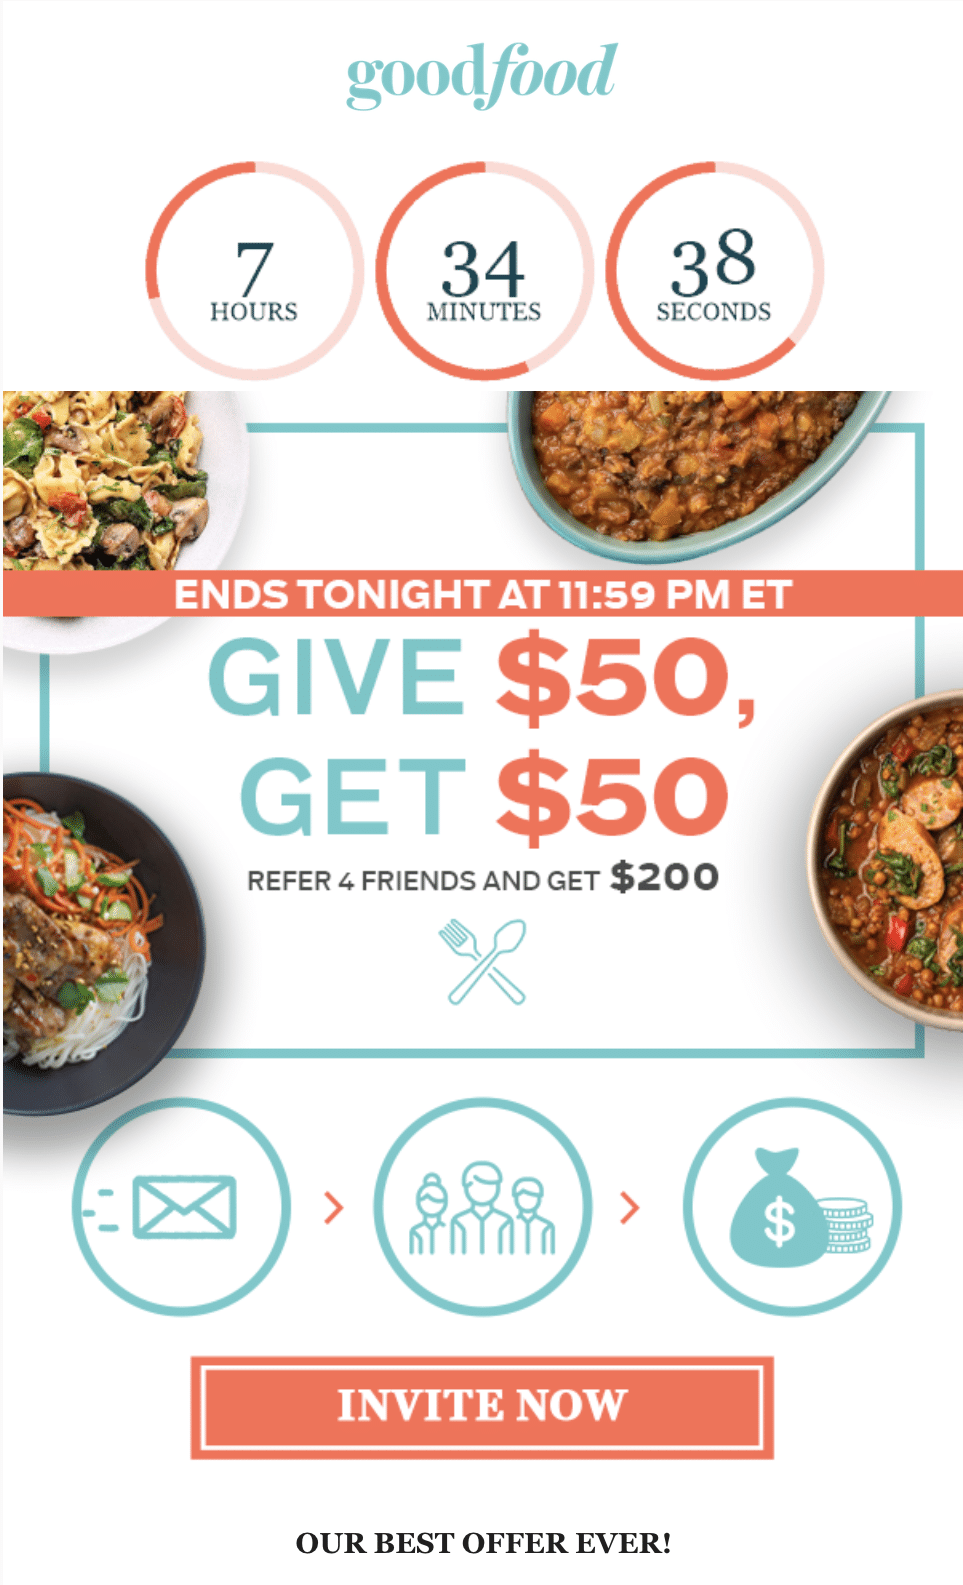 Goodfood email example